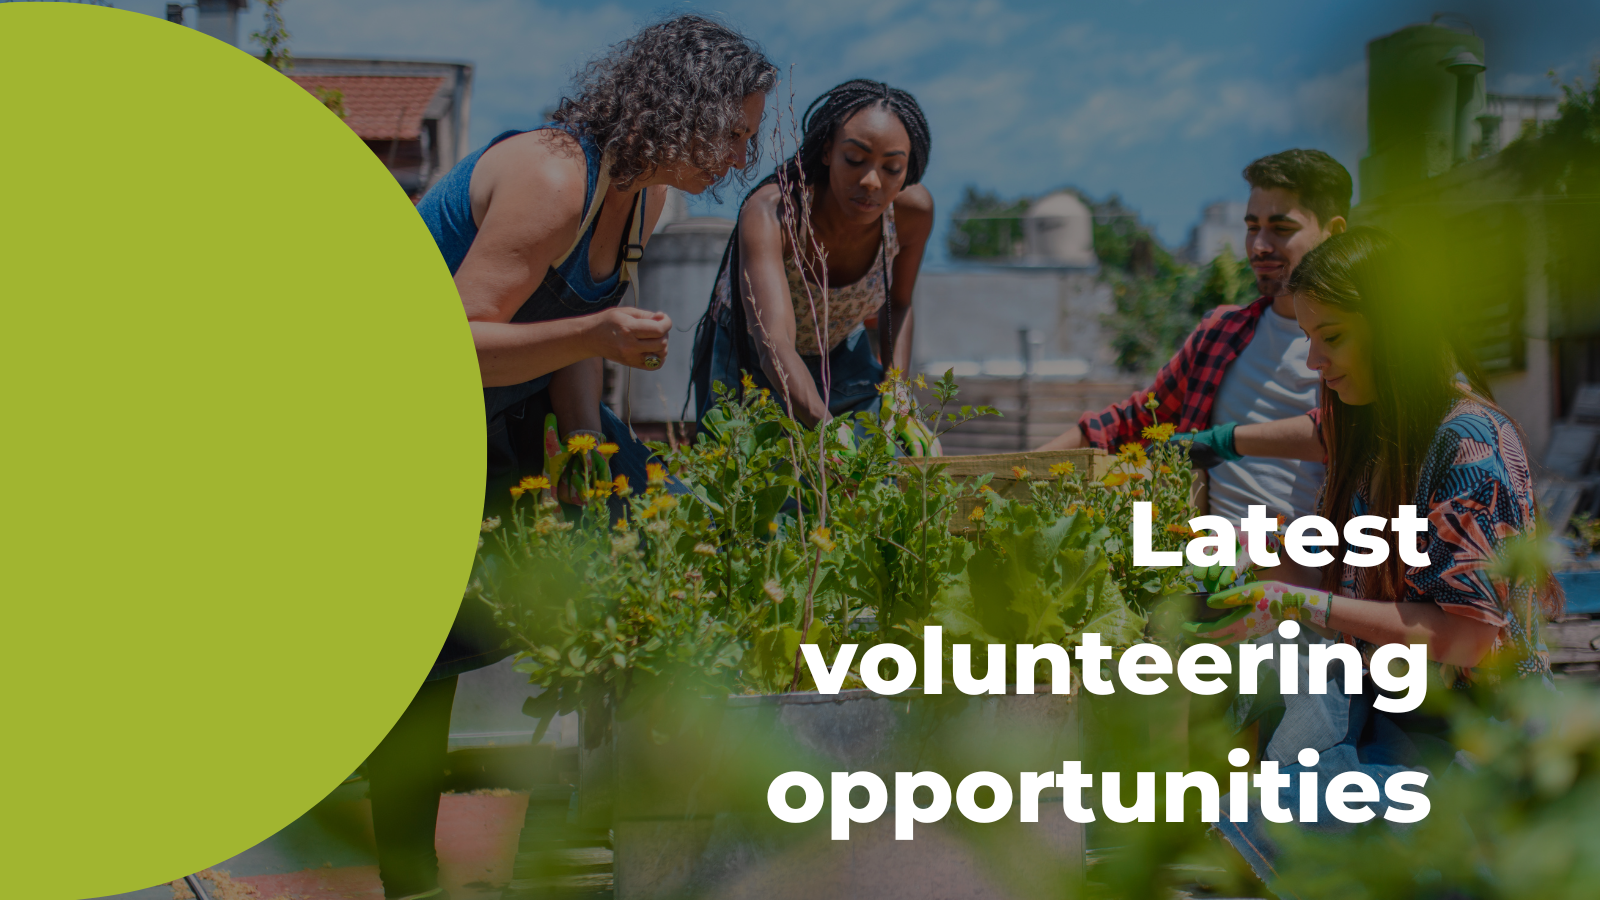 Featured image for “Latest volunteering opportunities”